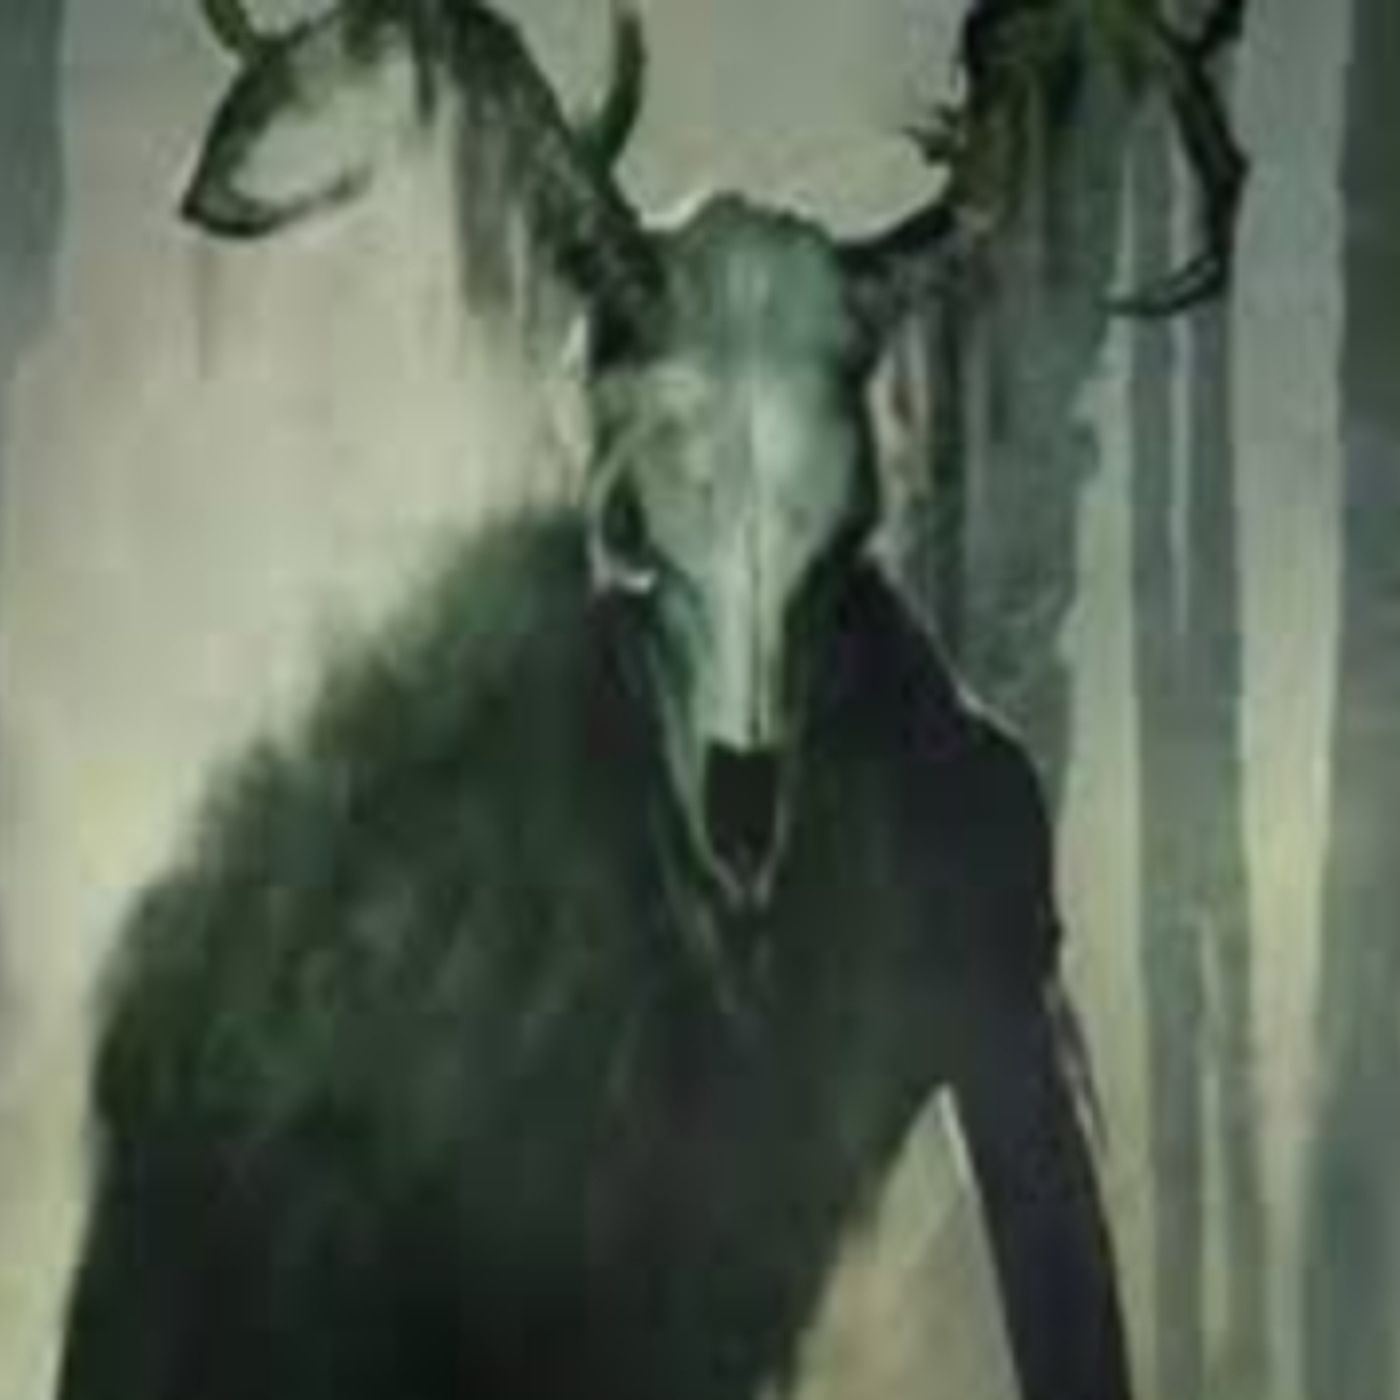 The Deer Headed Man. It has Stalked Him His Entire Life.